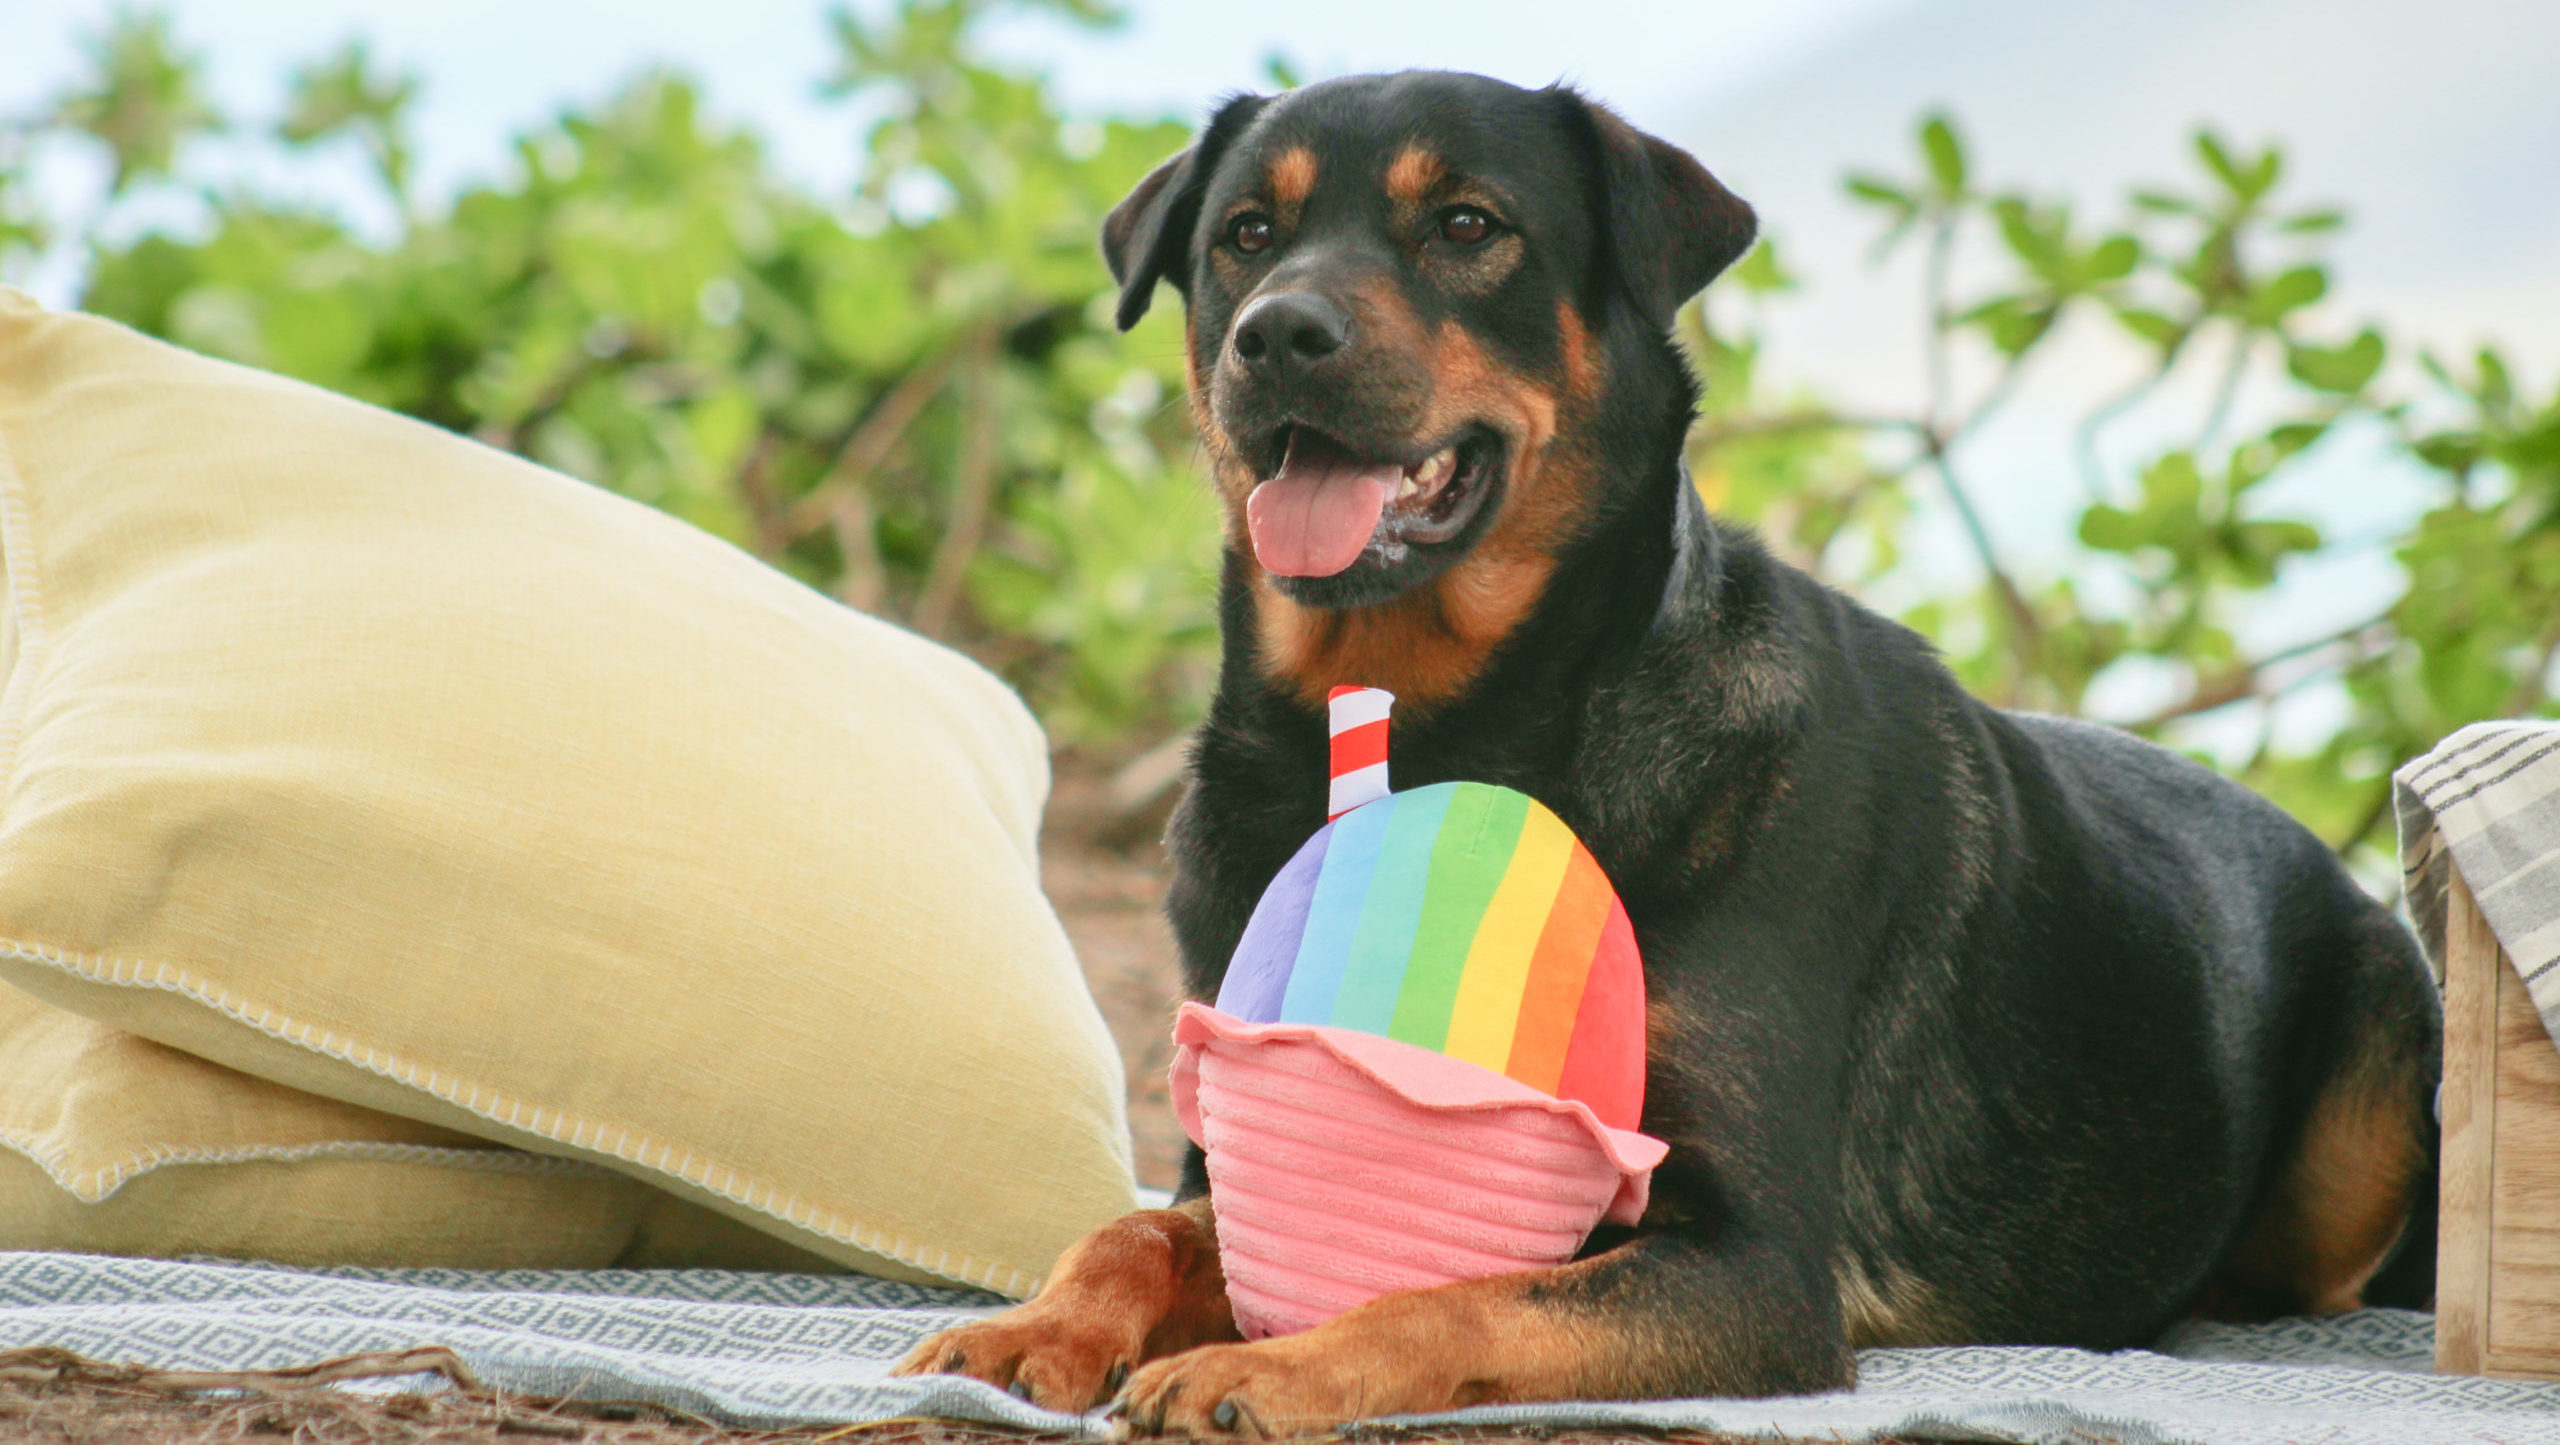 Shave Ice, Poi & Other Hawai'i Foods Are Now Dis-and-Bark Dog Toys